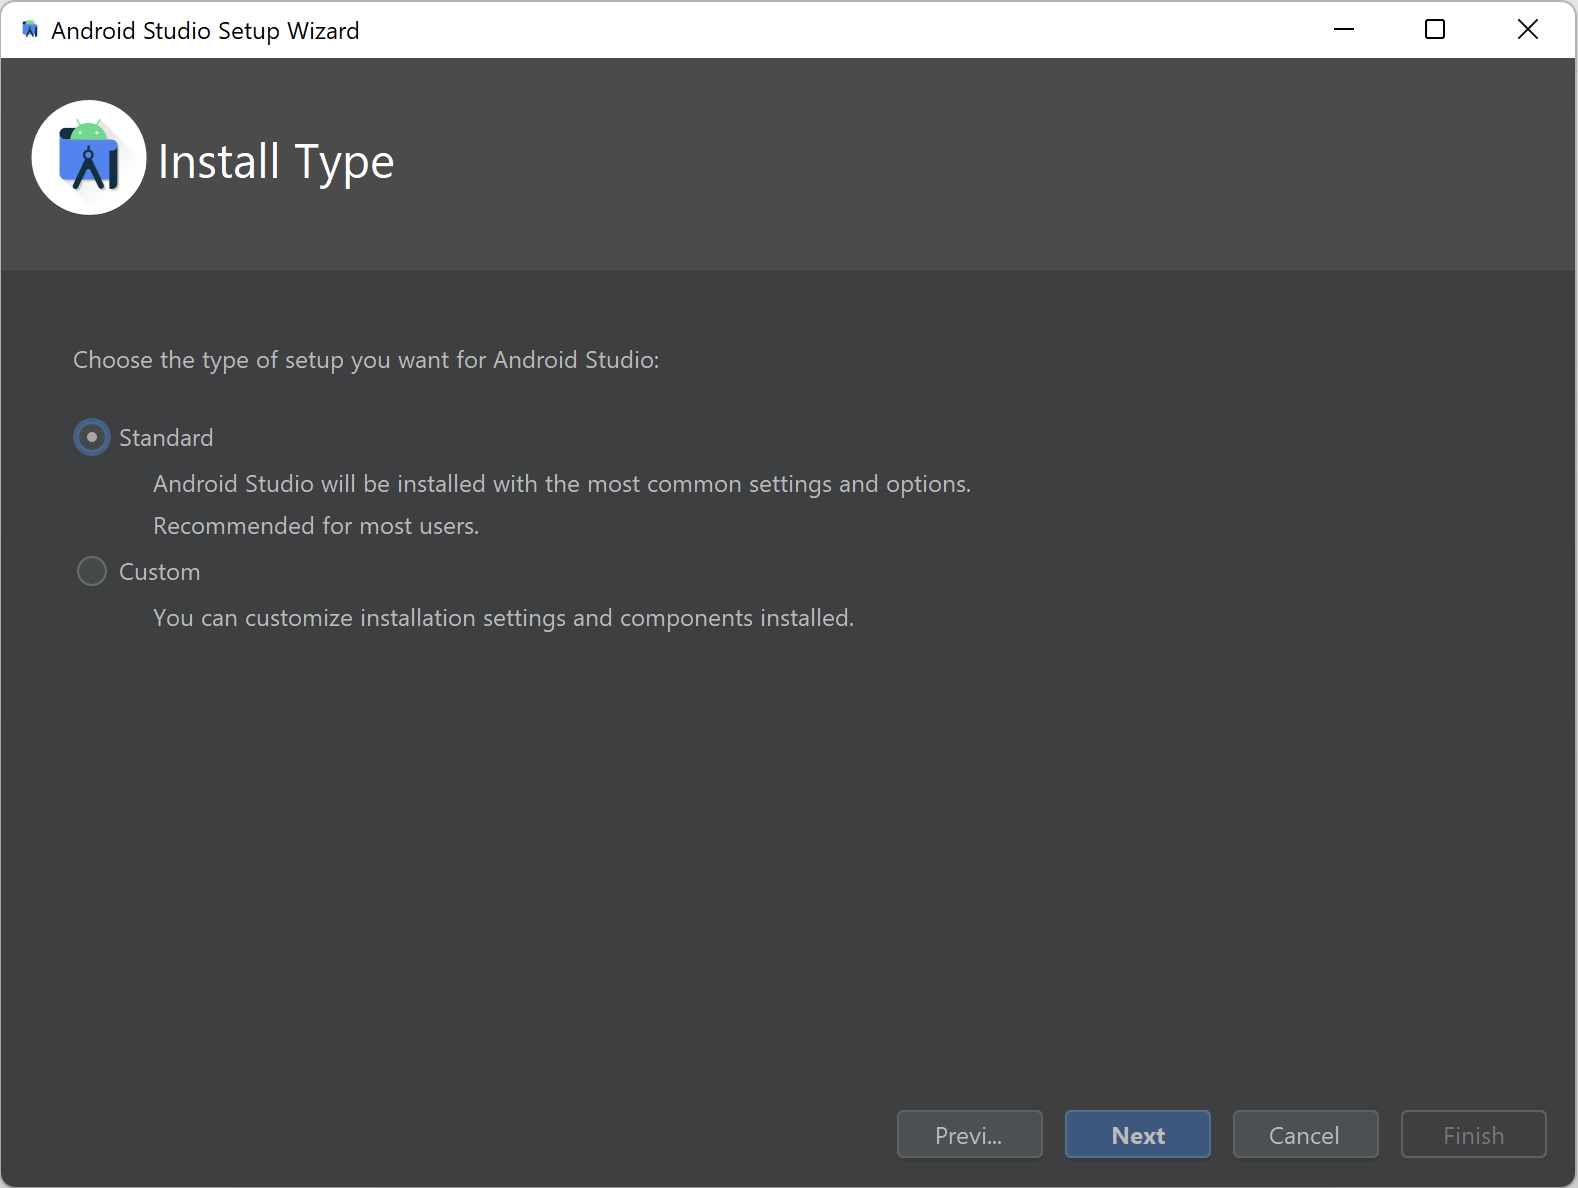 Install Type screen - Android Studio